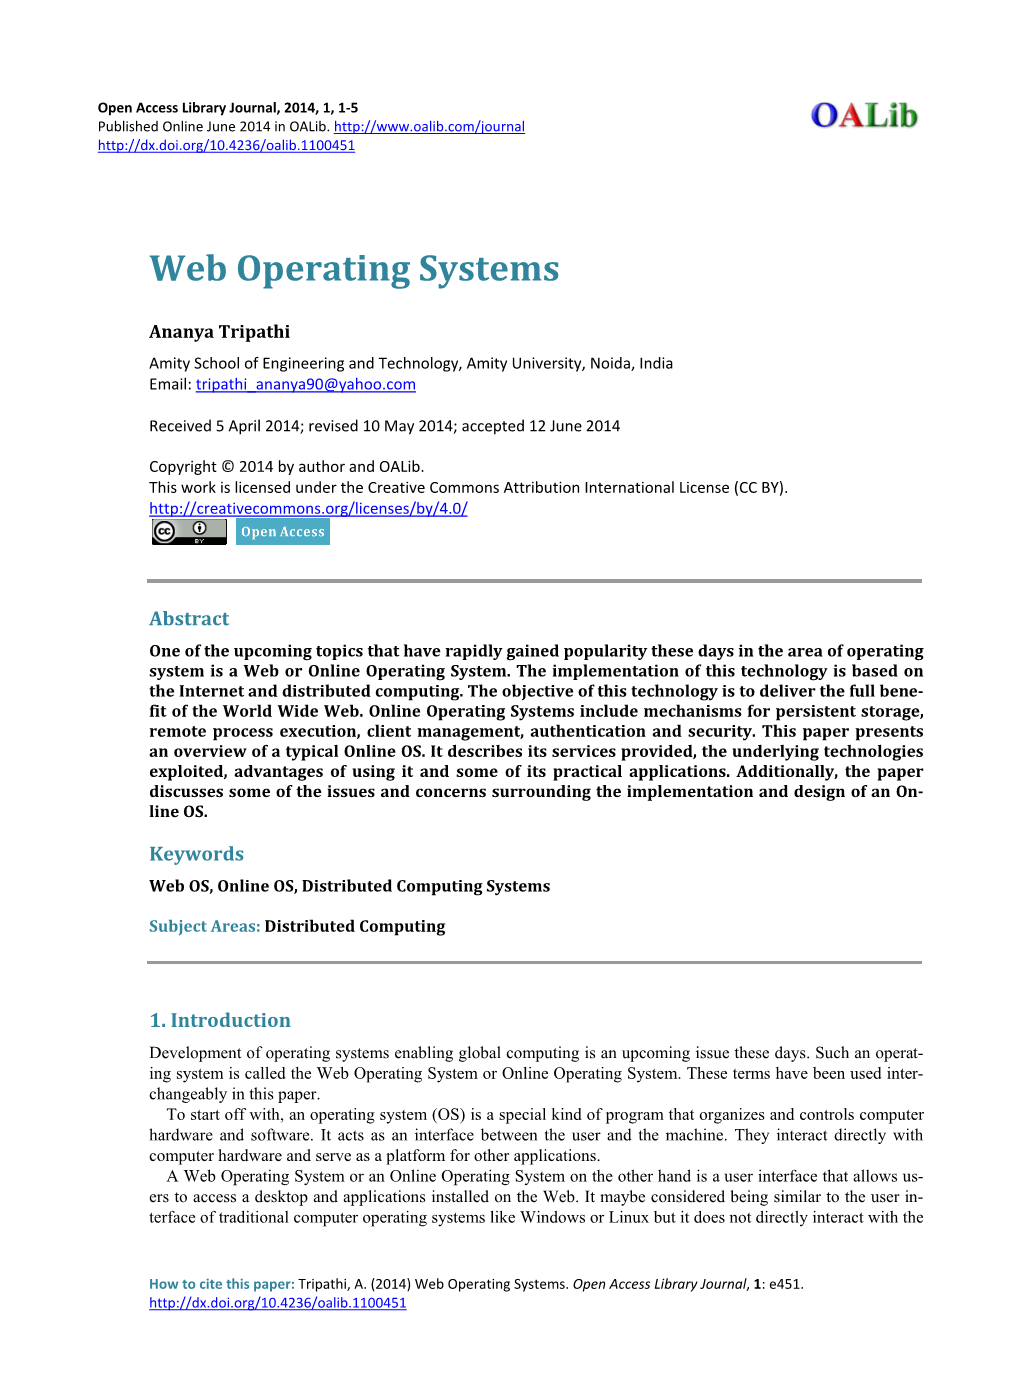 Web Operating Systems